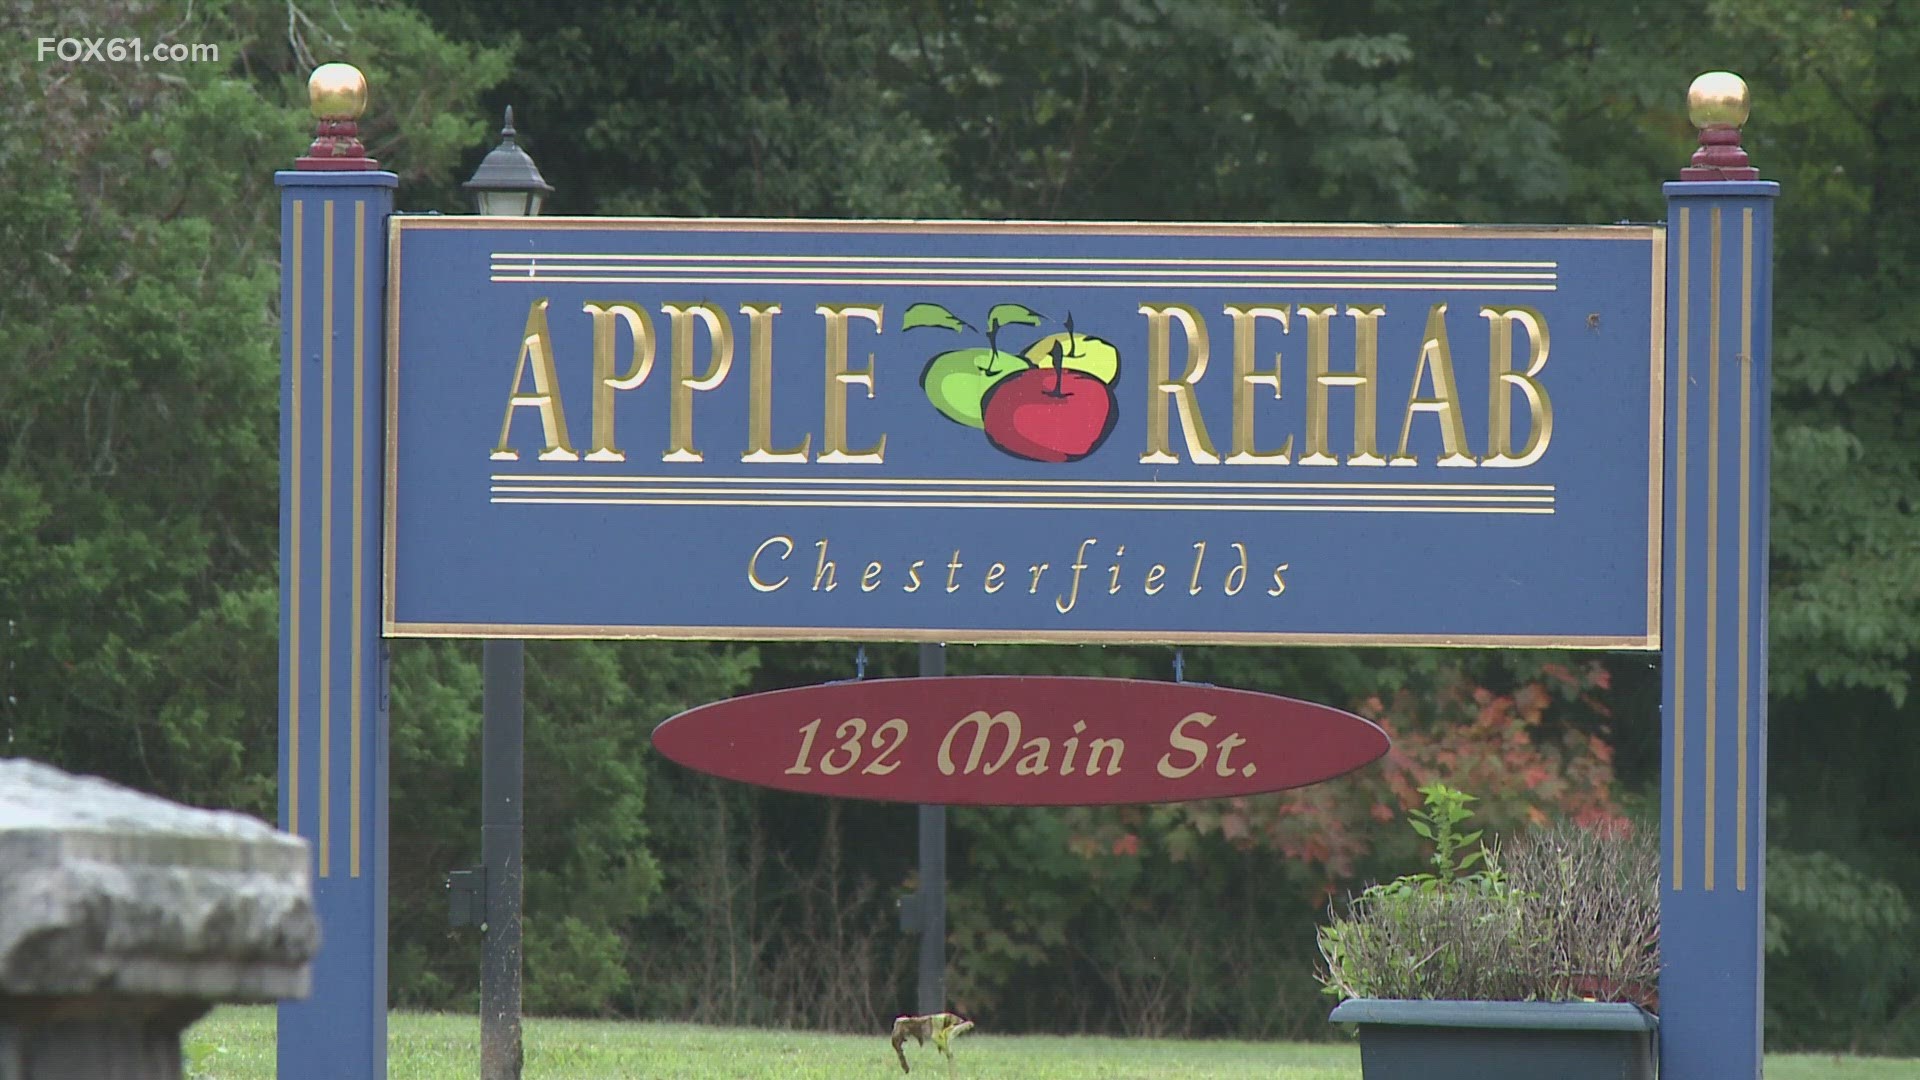 Apple Rehab Chesterfields is a 60-bed facility, but the company says a lot of those beds are empty, which factored into the decision to close.